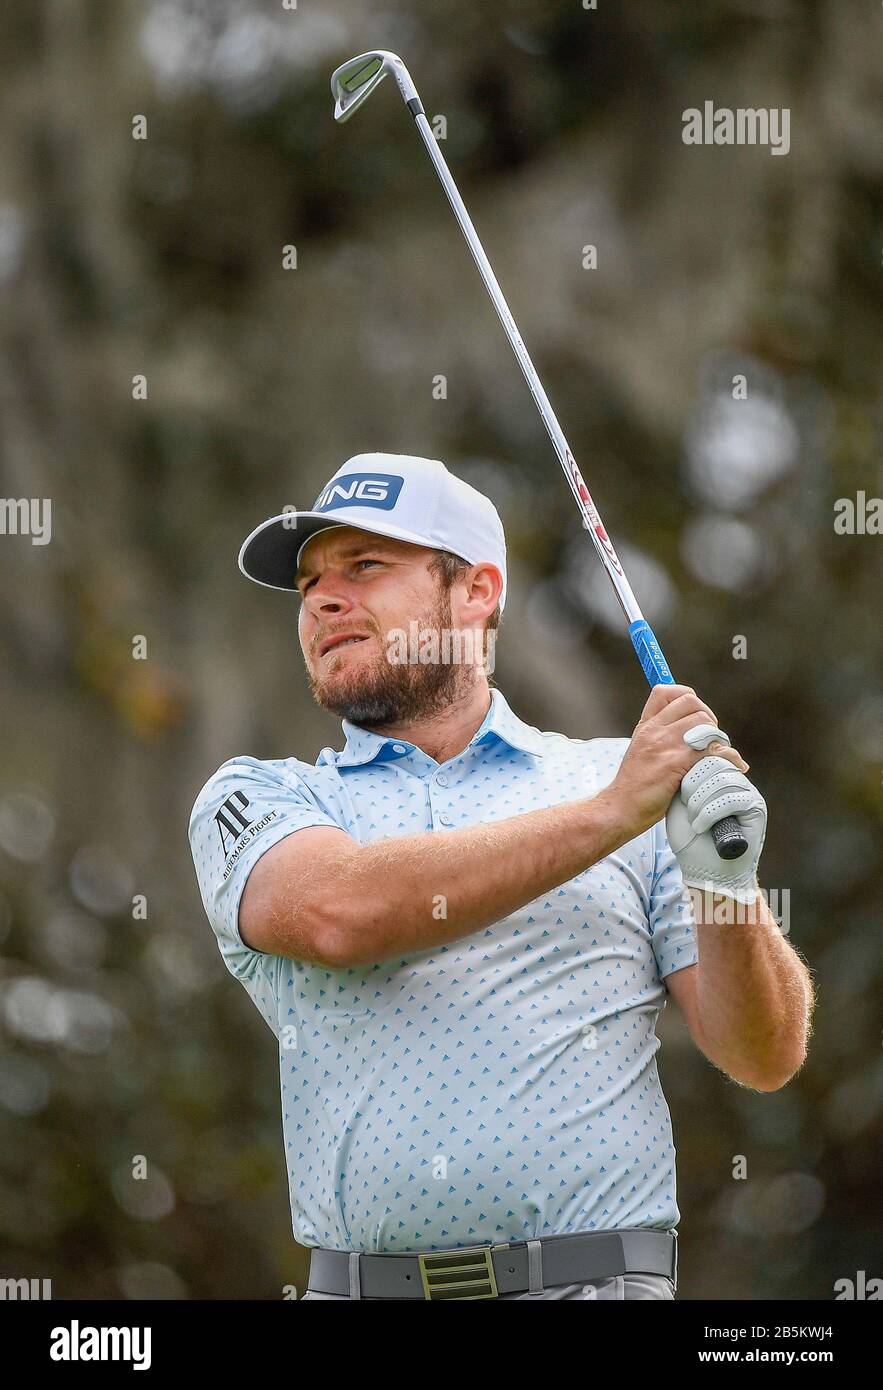 Orlando, FL, USA. 8th Mar, 2020. Tyrrell Hatton of England on the second tee during the final round of the Arnold Palmer Invitational presented by Mastercard held at Arnold Palmer's Bay Hill Club & Lodge in Orlando, Fl. Romeo T Guzman/CSM/Alamy Live News Stock Photo